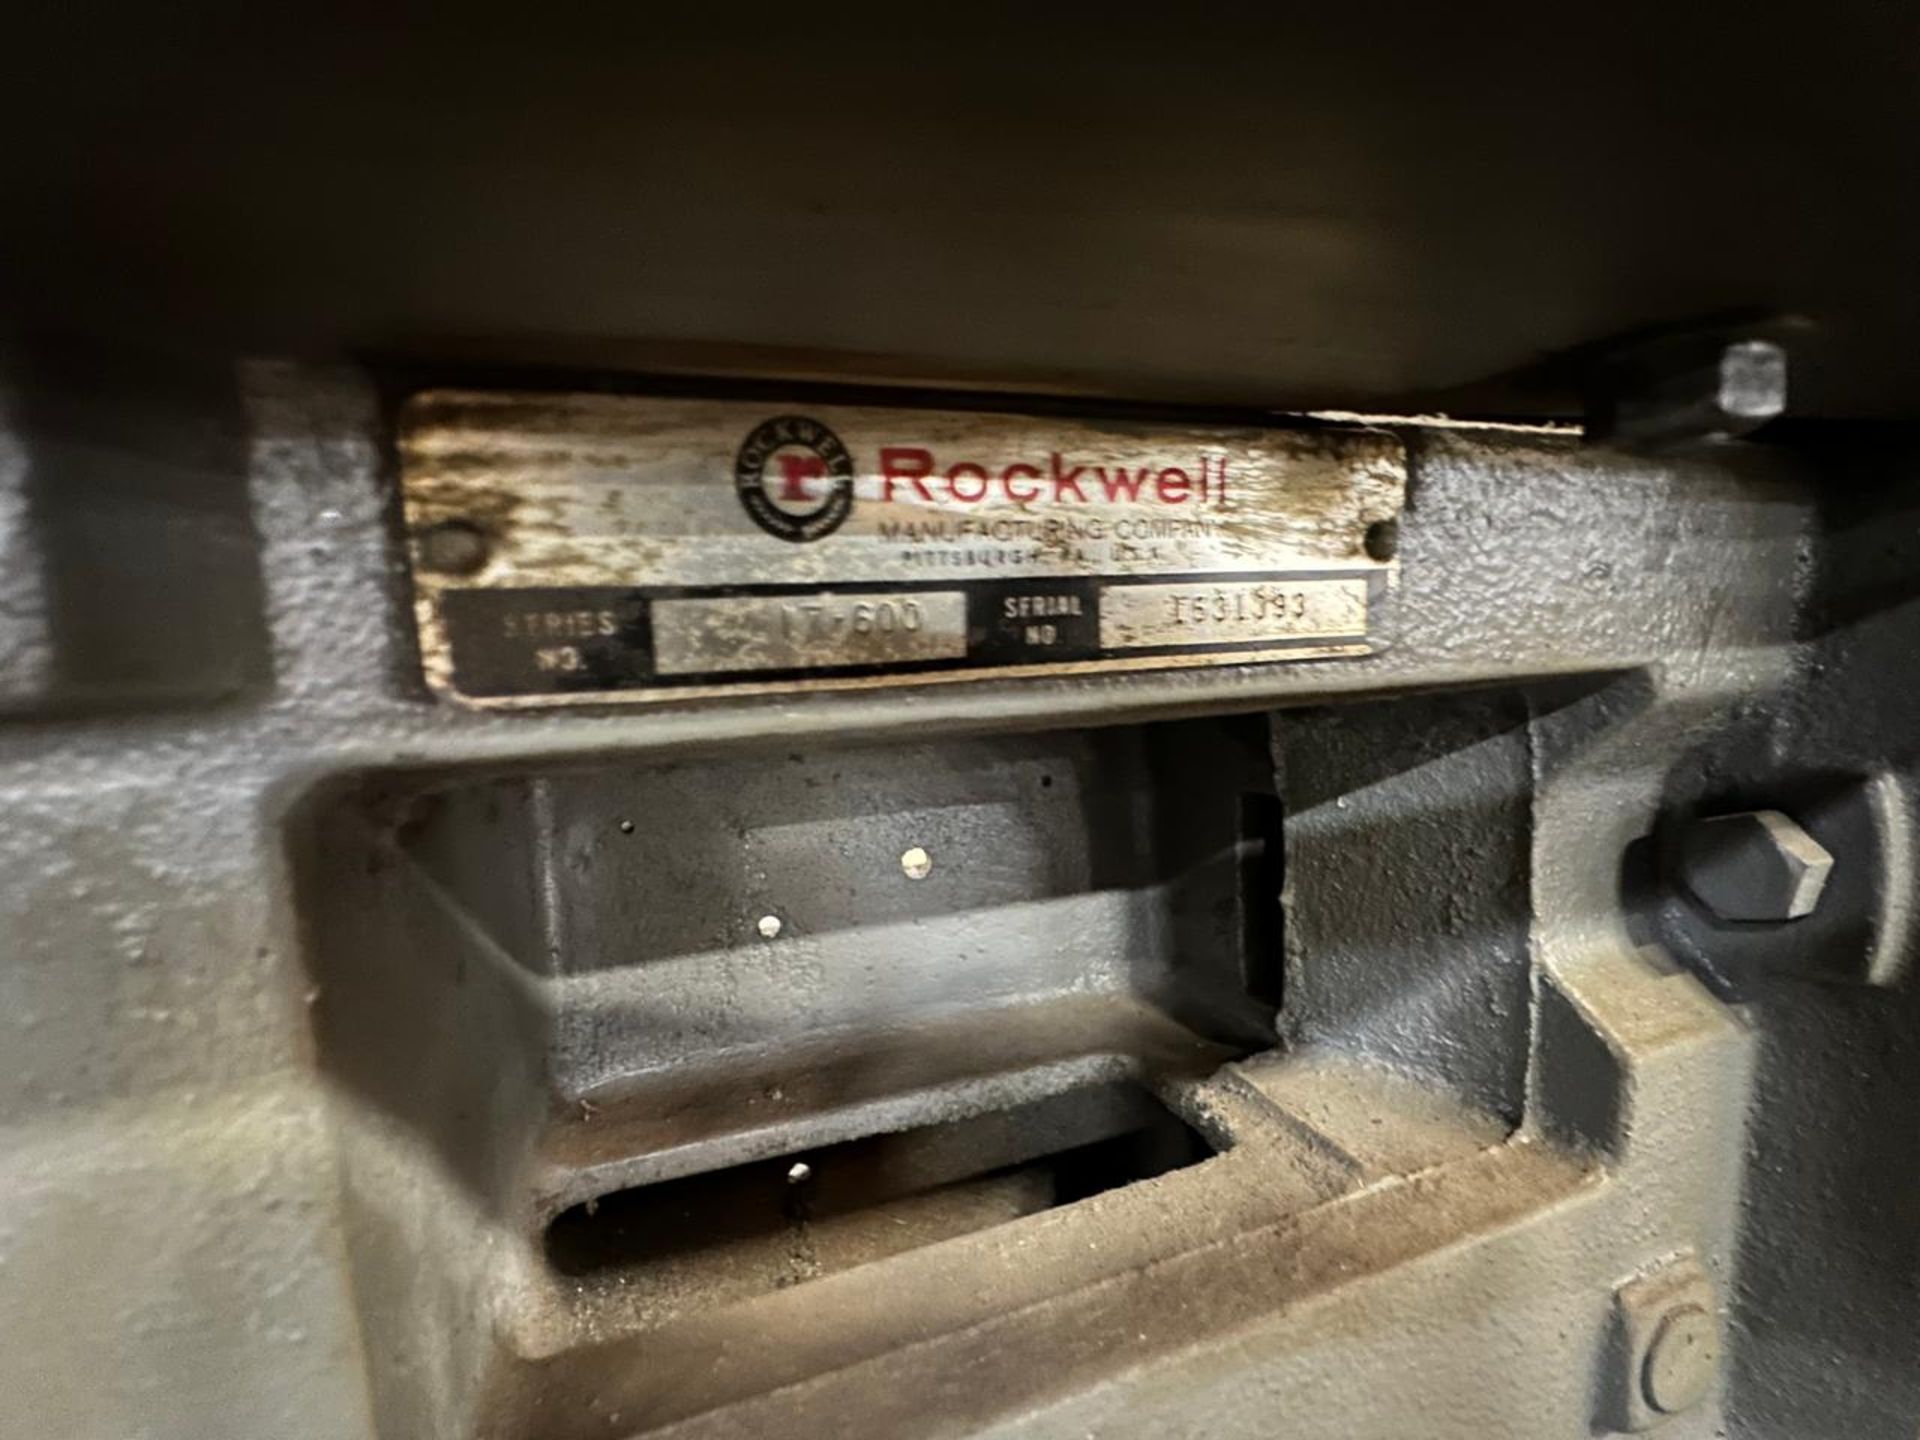 Rockwell 17-600 Drill Press - Image 2 of 3